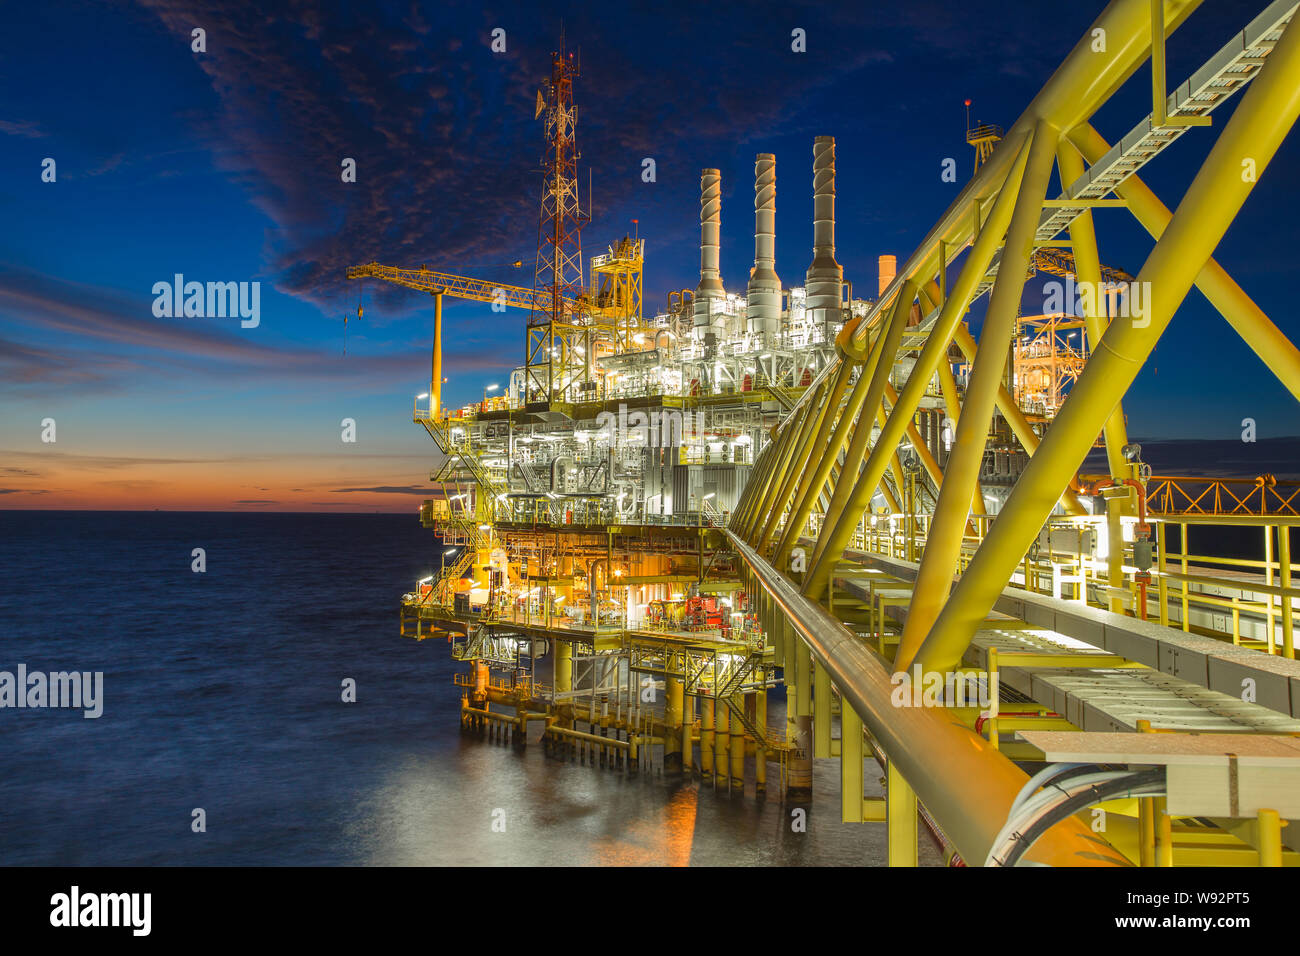 Origin of world energy and pretochemical,Oil and gas processing platform produced gas and crud oil condensate and sent to onshore refinery. Stock Photo